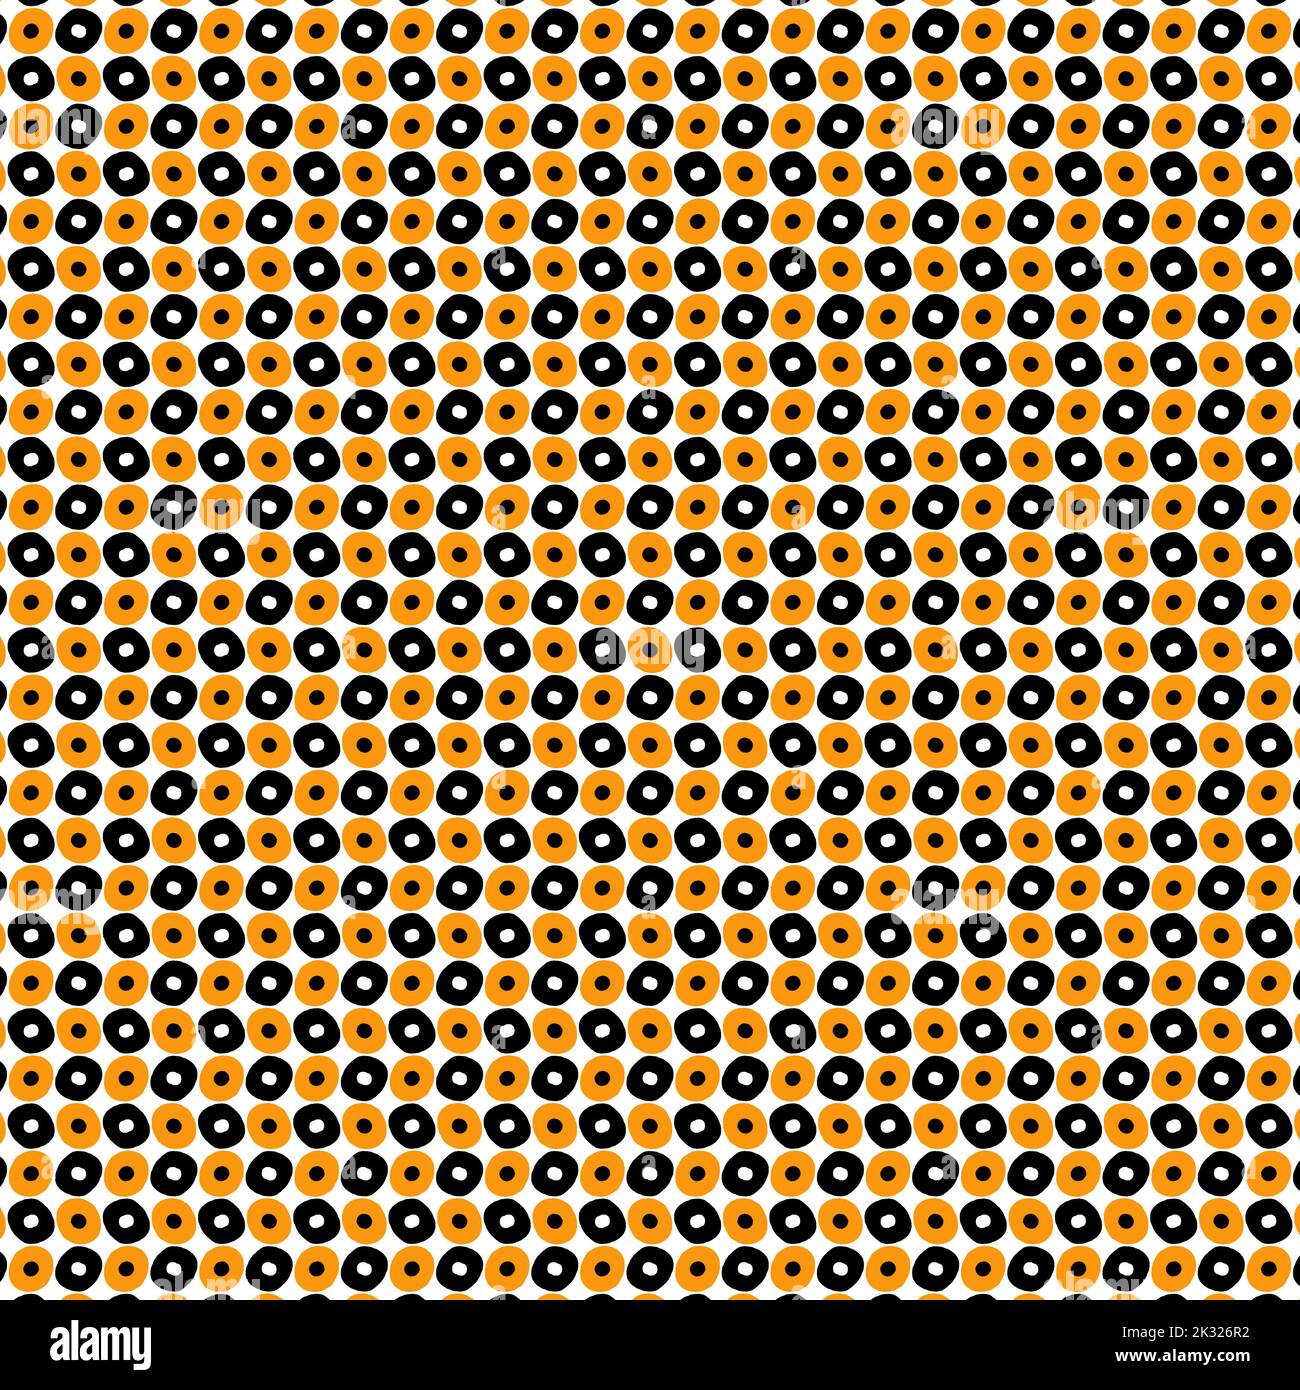 Seamless abstract pattern design with free-hand black, white, and orange dots, graphic pattern for textile, wallpaper, or paper wrap Stock Photo